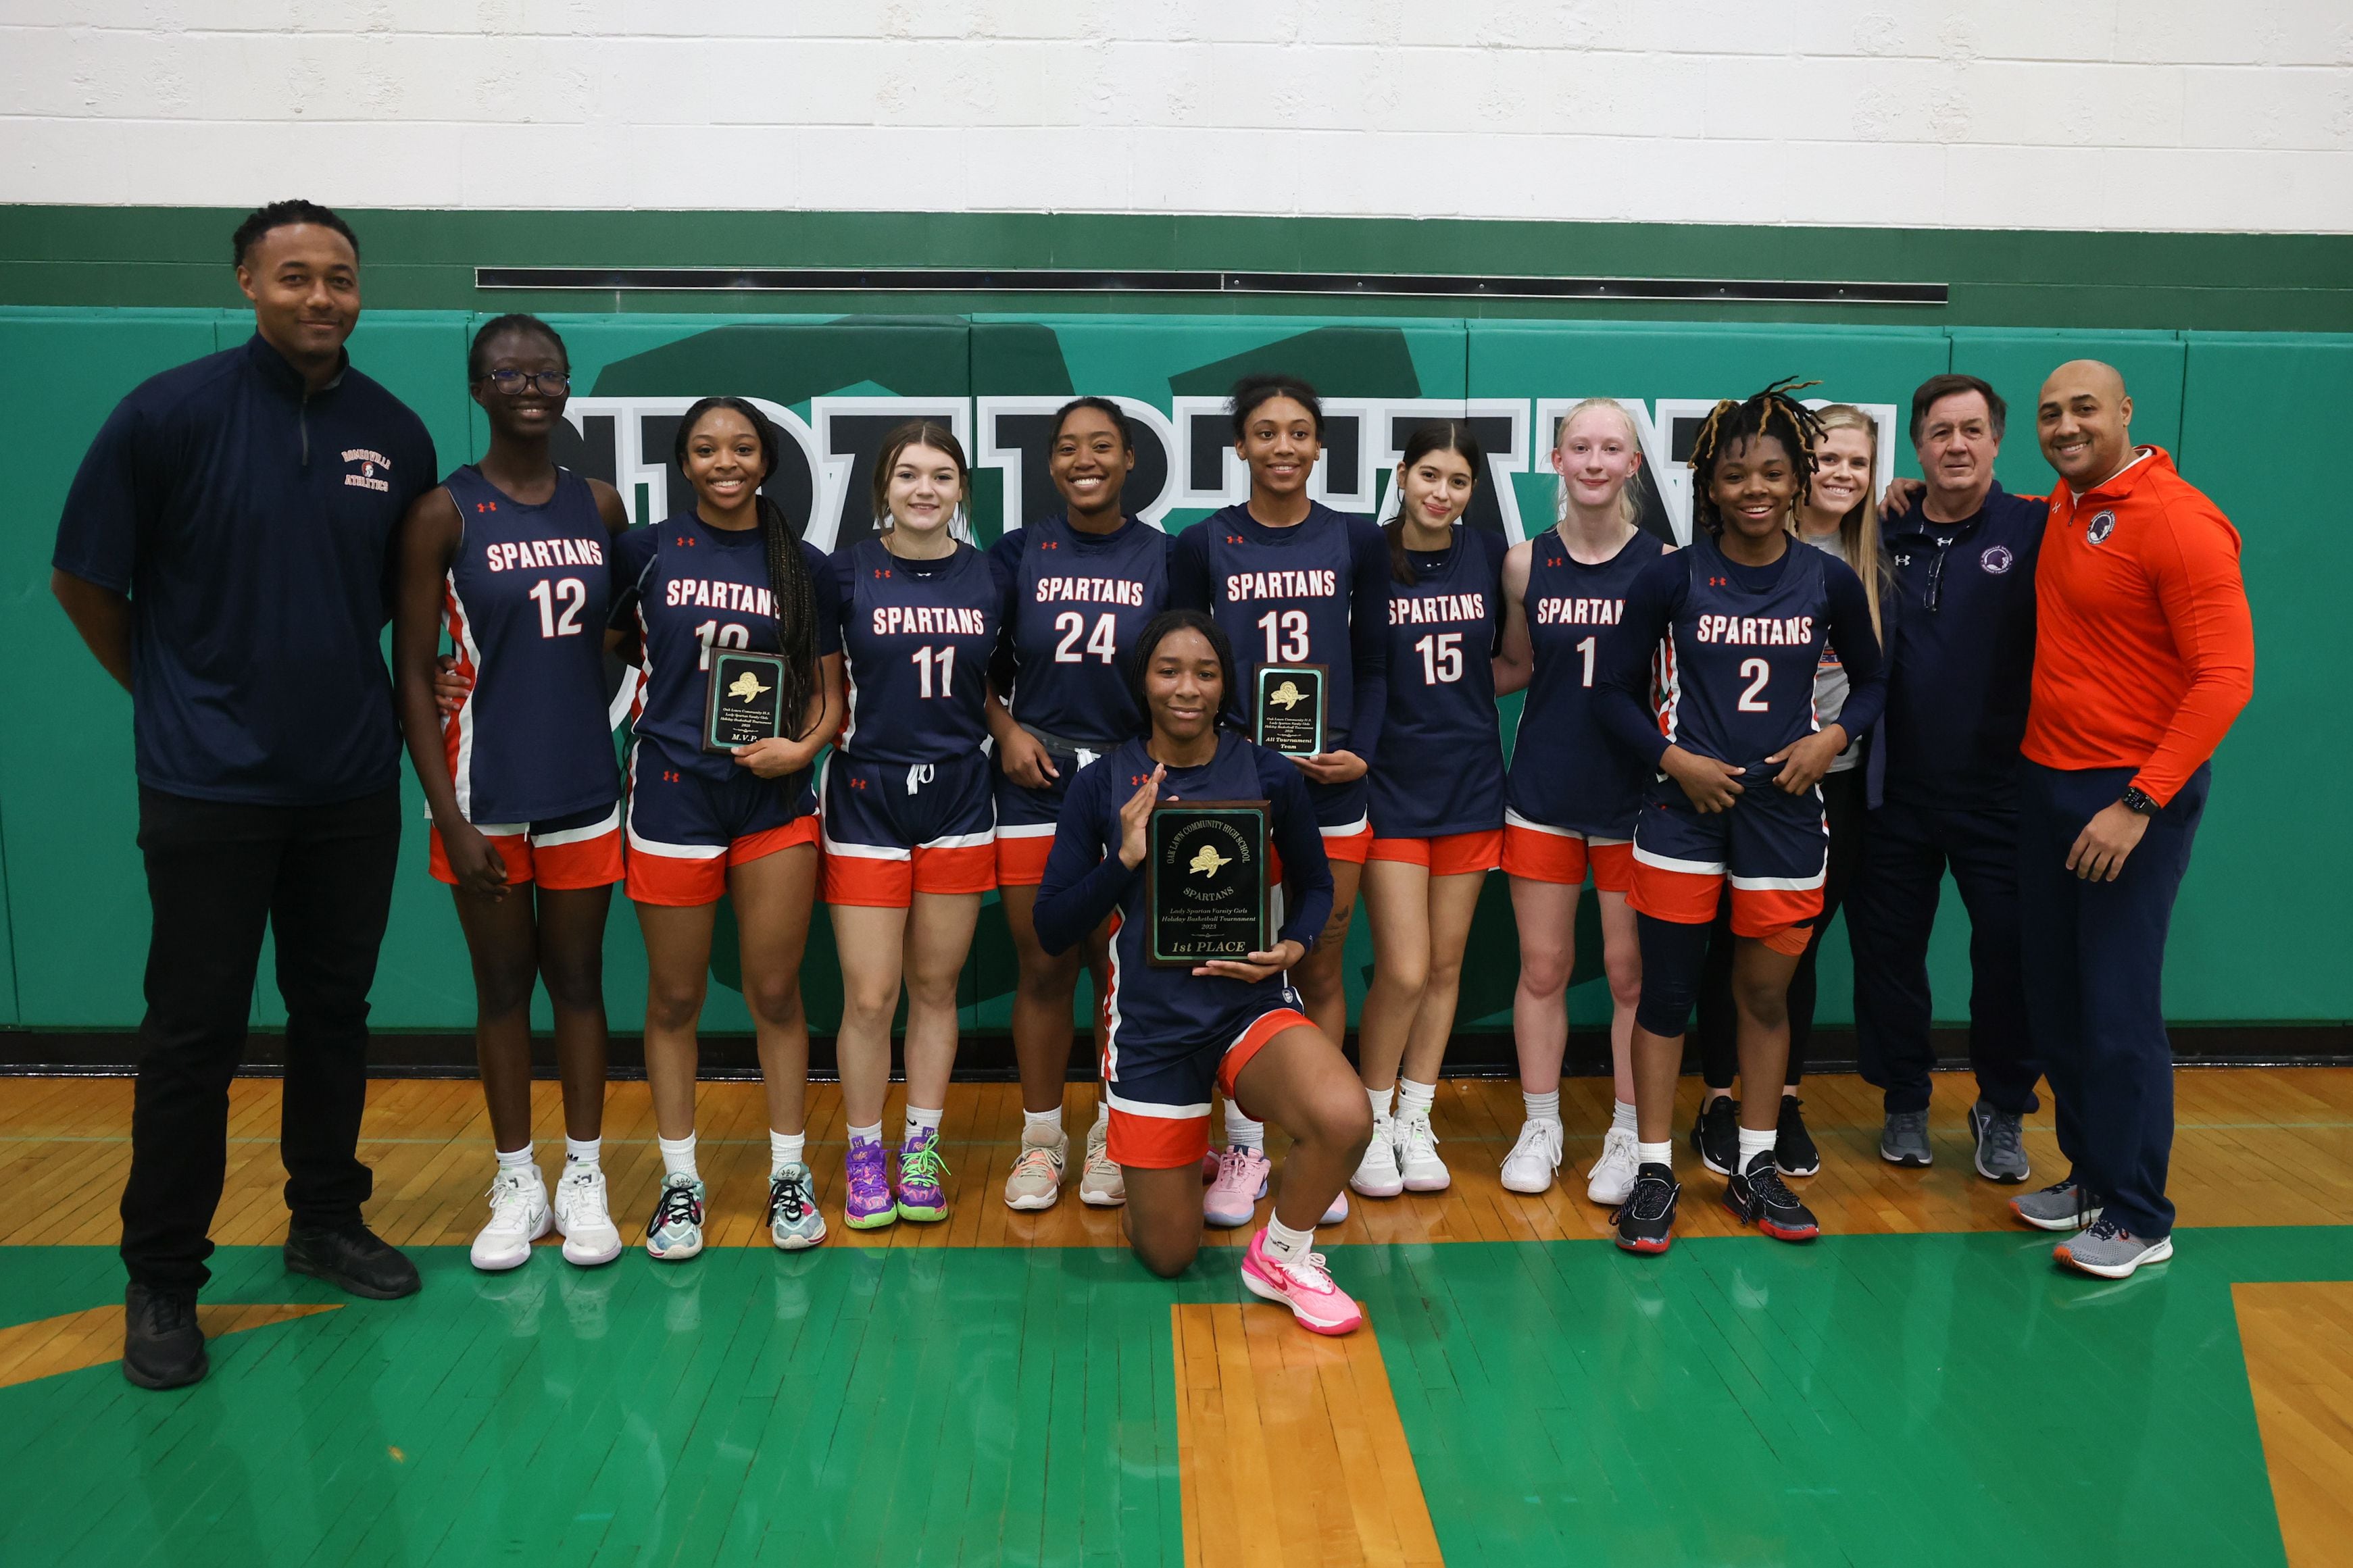 Romeoville poses with the championship plaque after their 46-35 win over Lockport in the Oak Lawn Holiday Tournament championship on Saturday, Dec.16th. Jaylen Zachary (10) was named tournament MVP and Jadea Johnson (13) made All-Tournament Team.